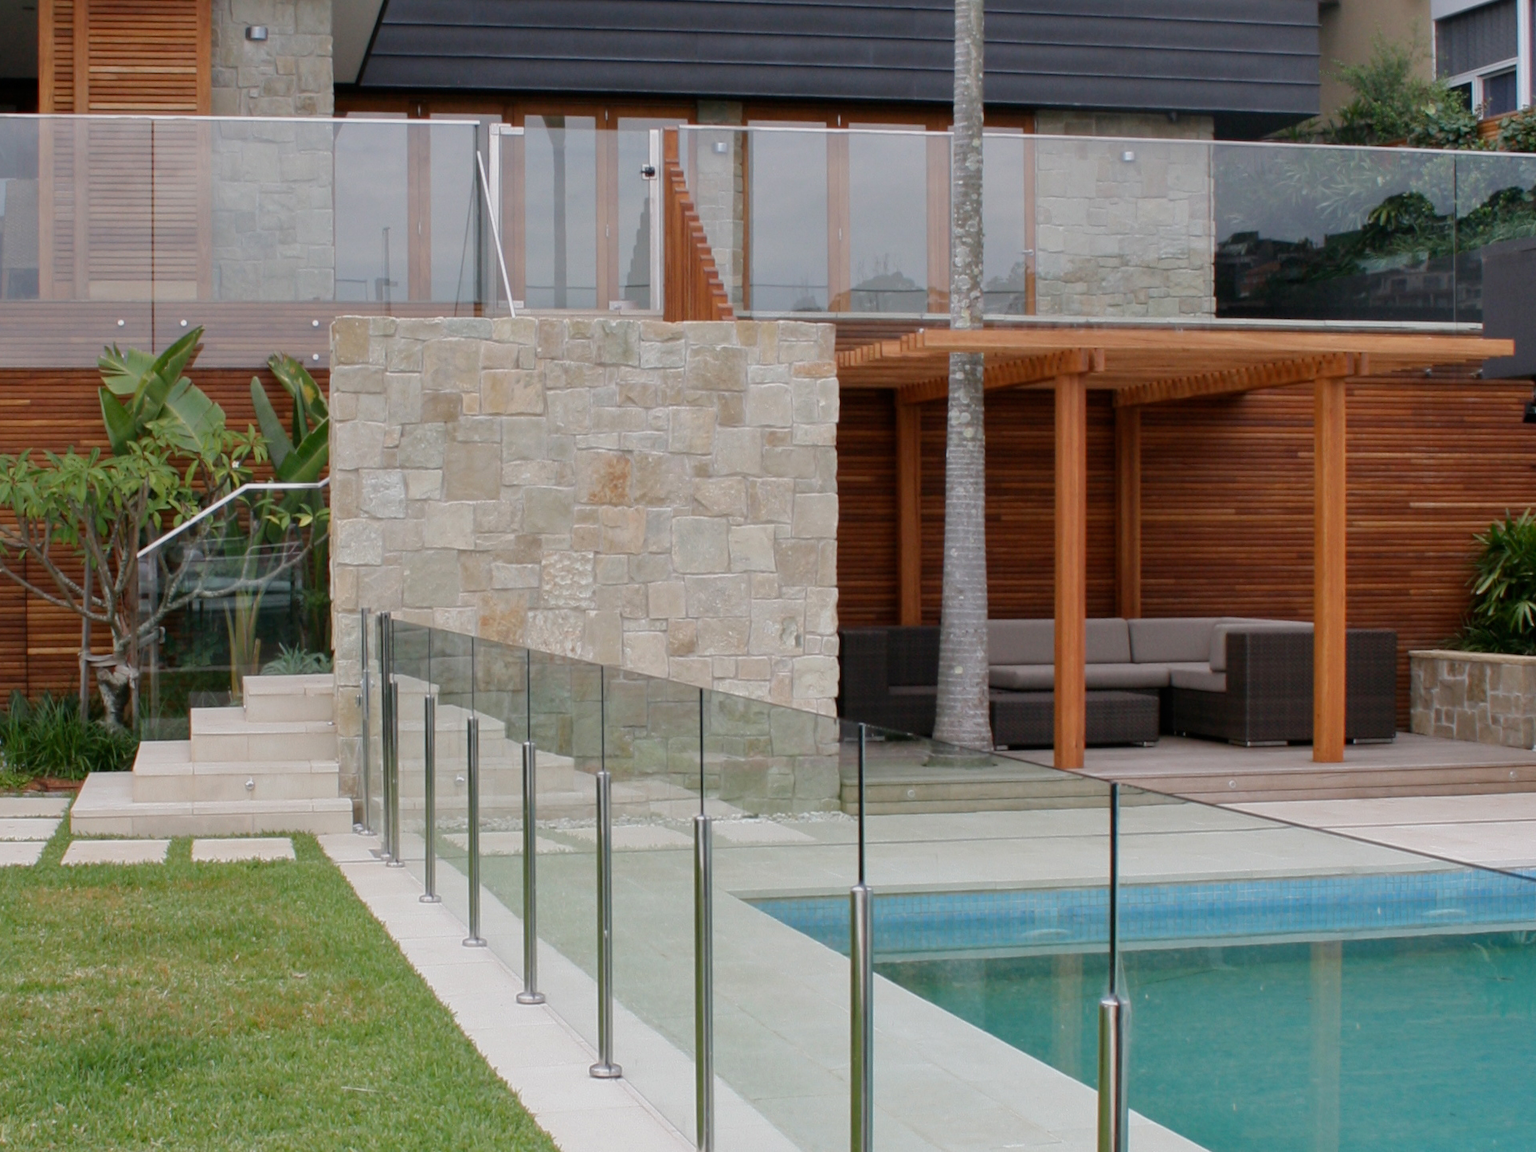 Pool area using Cashmere concrete pavers and coping units with Clancy random ashlar sandstone walling in background